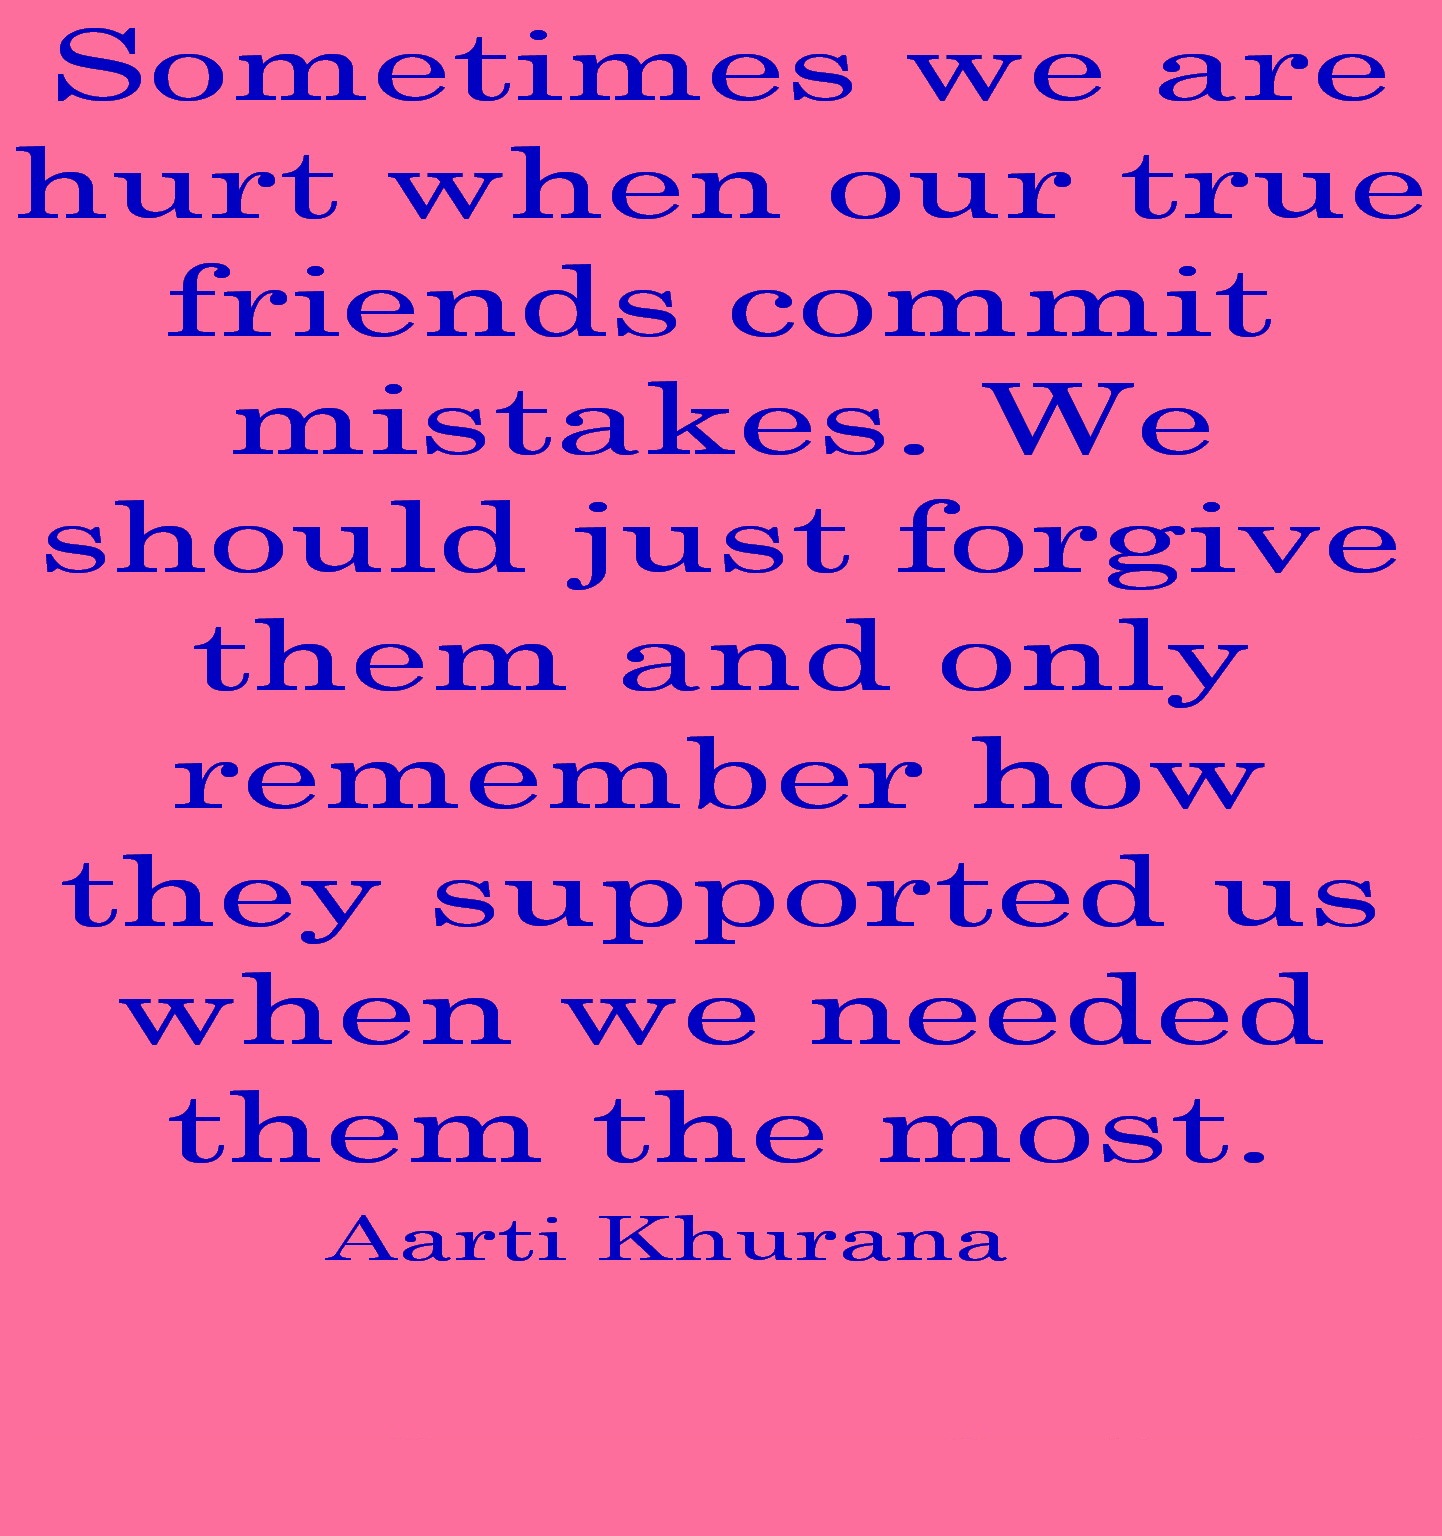 Quotes About Being Friends With Benefits. QuotesGram